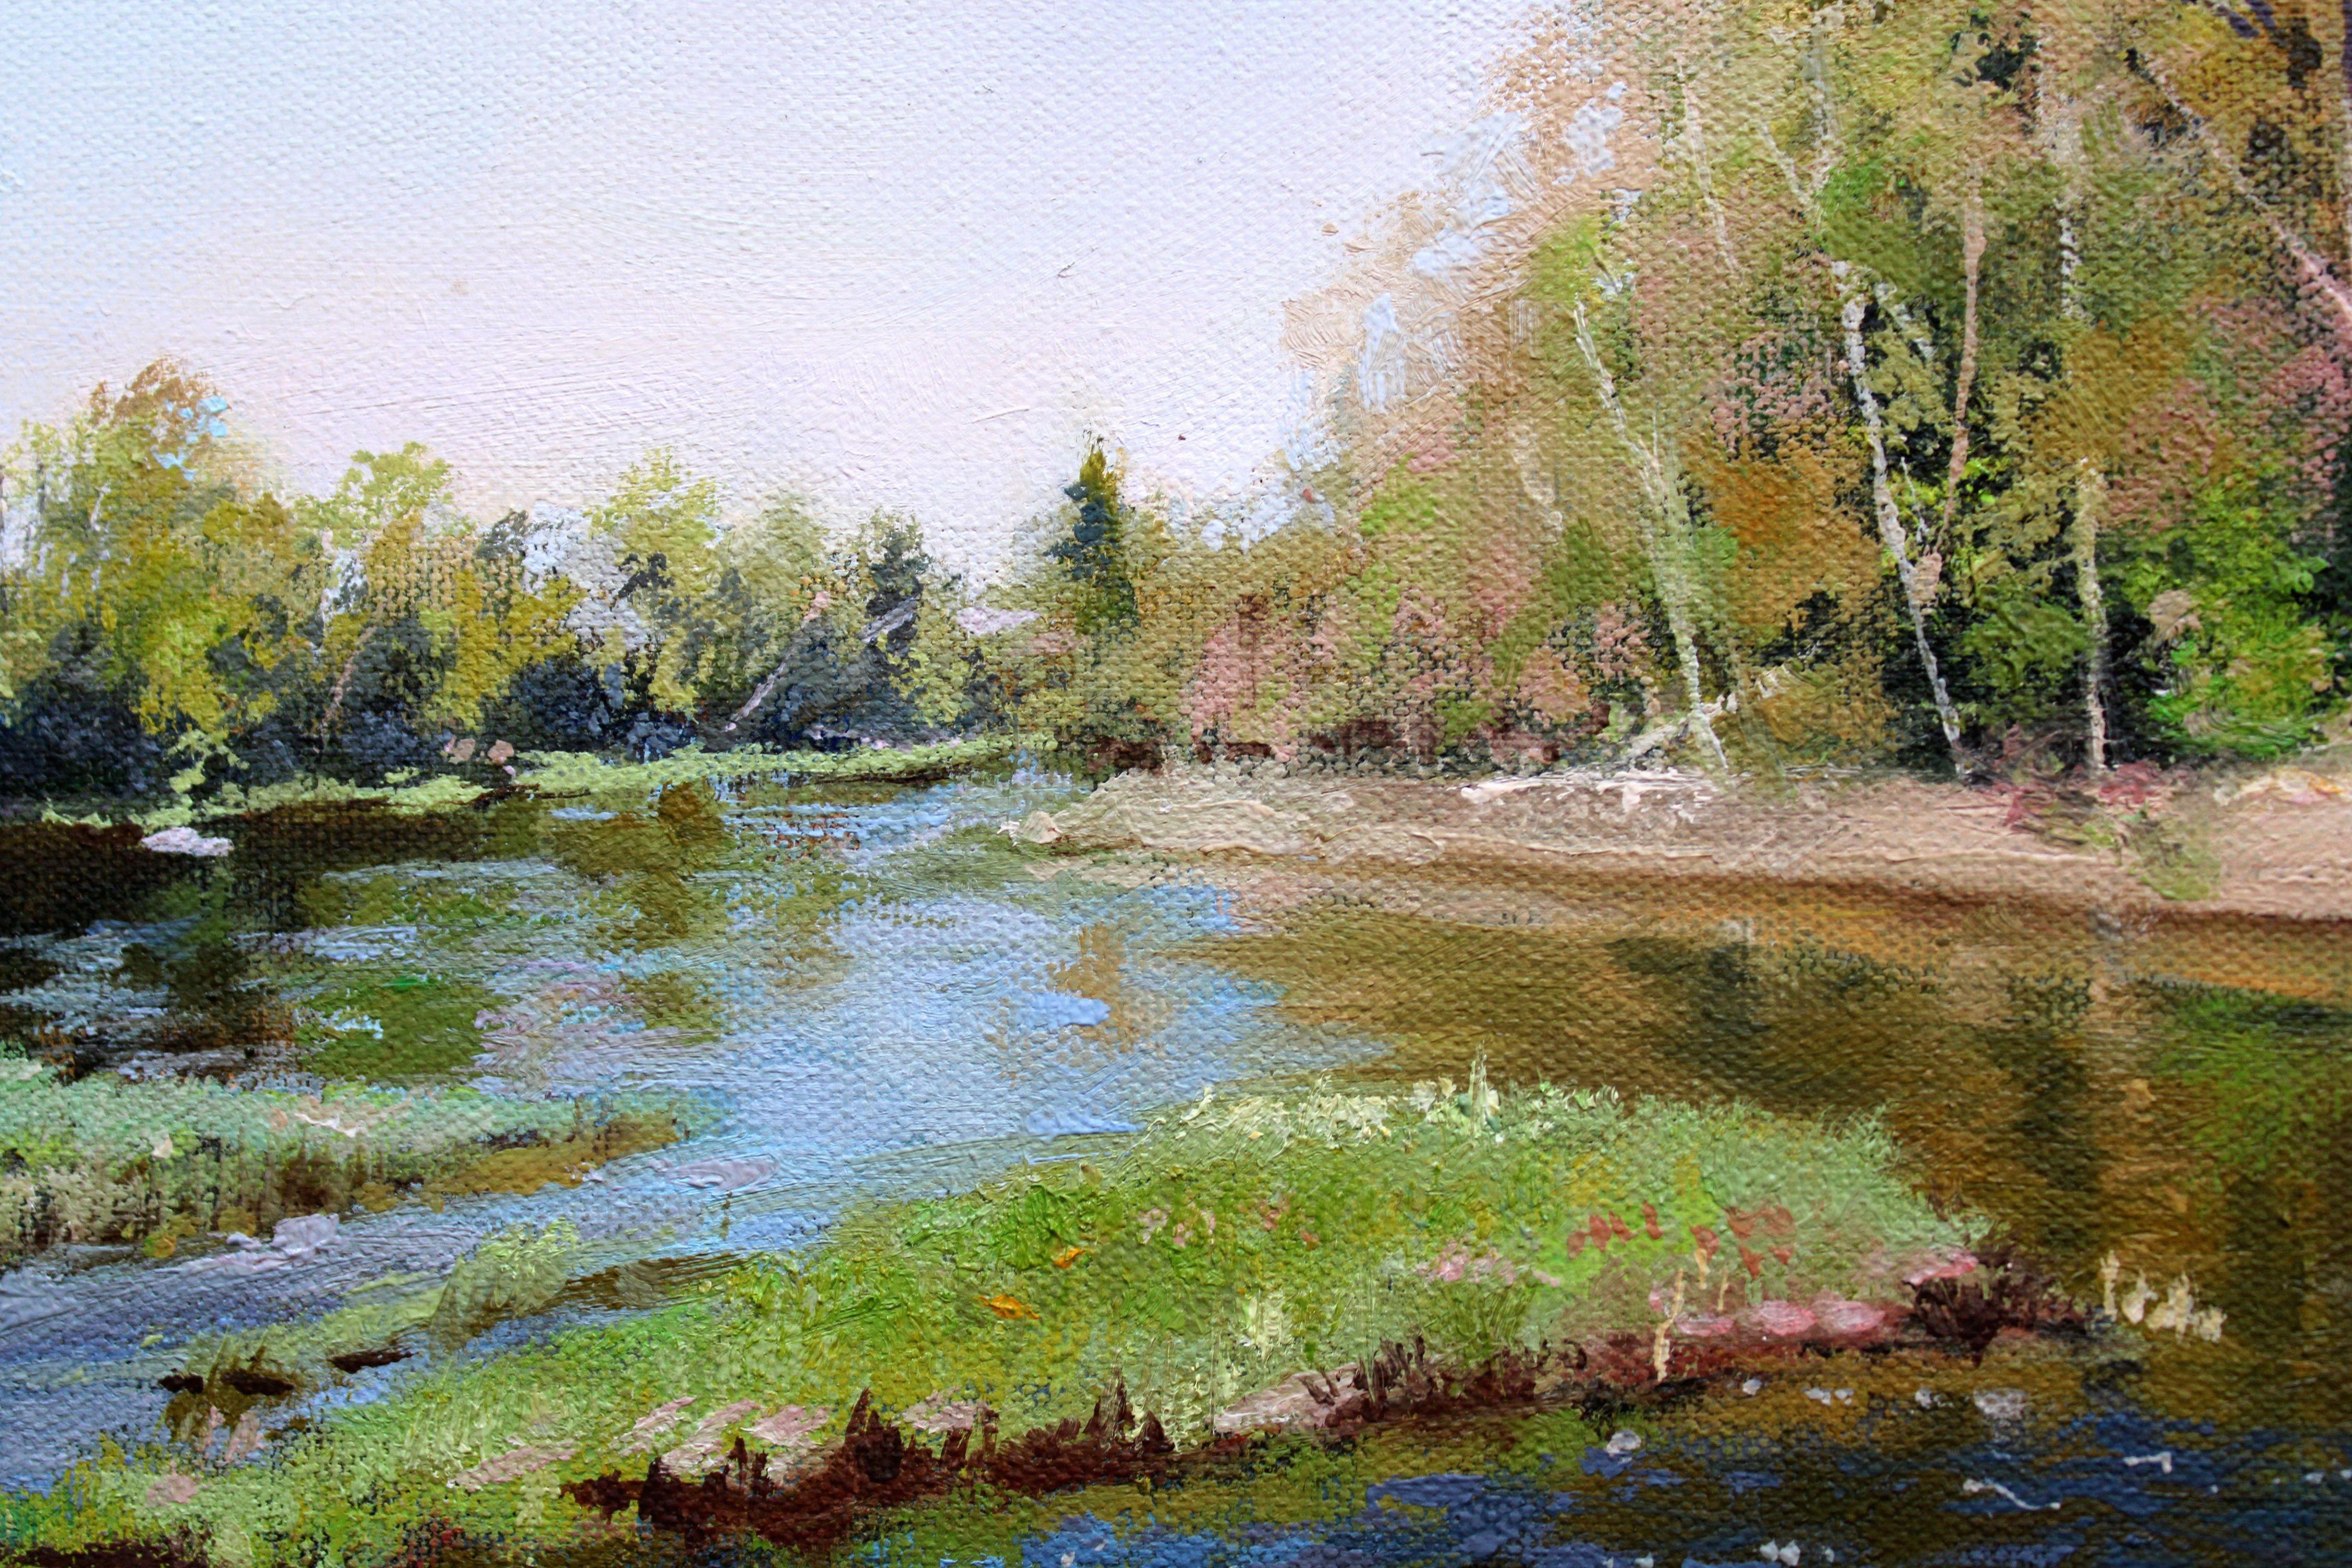 May. The Lobe River flows into Ogre. Oil on canvas, 40x50 cm

